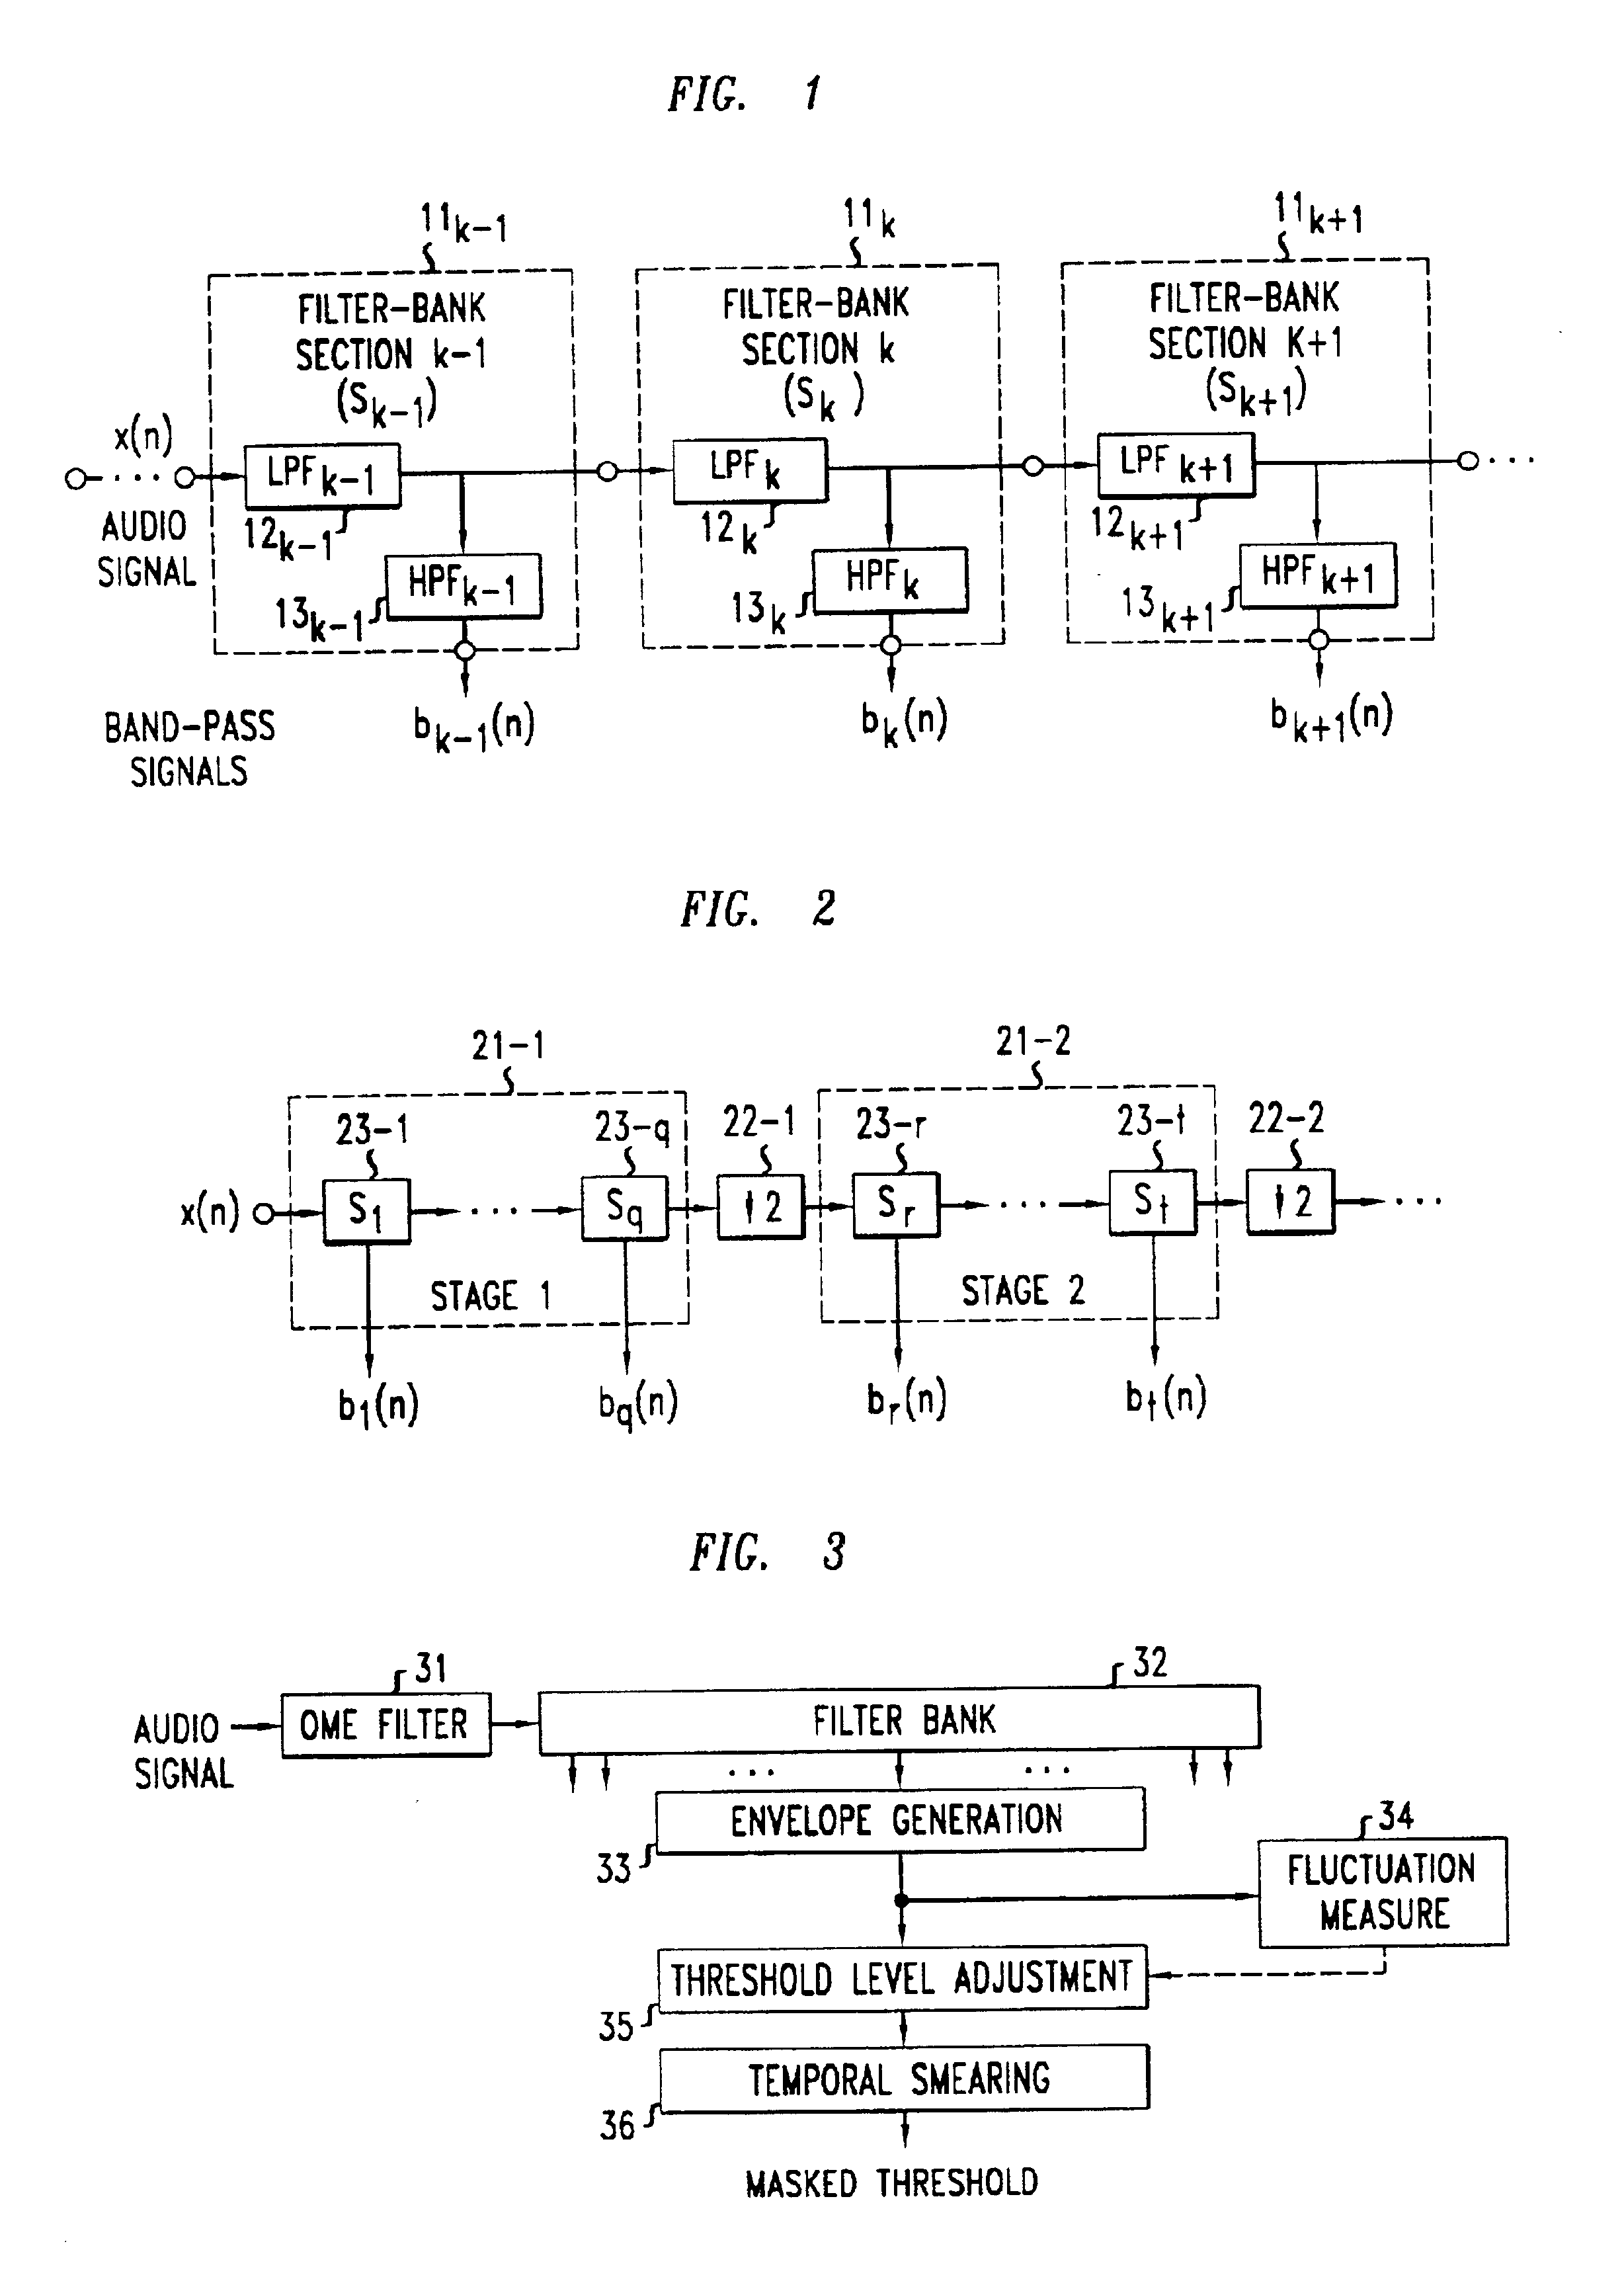 Cochlear filter bank structure for determining masked thresholds for use in perceptual audio coding